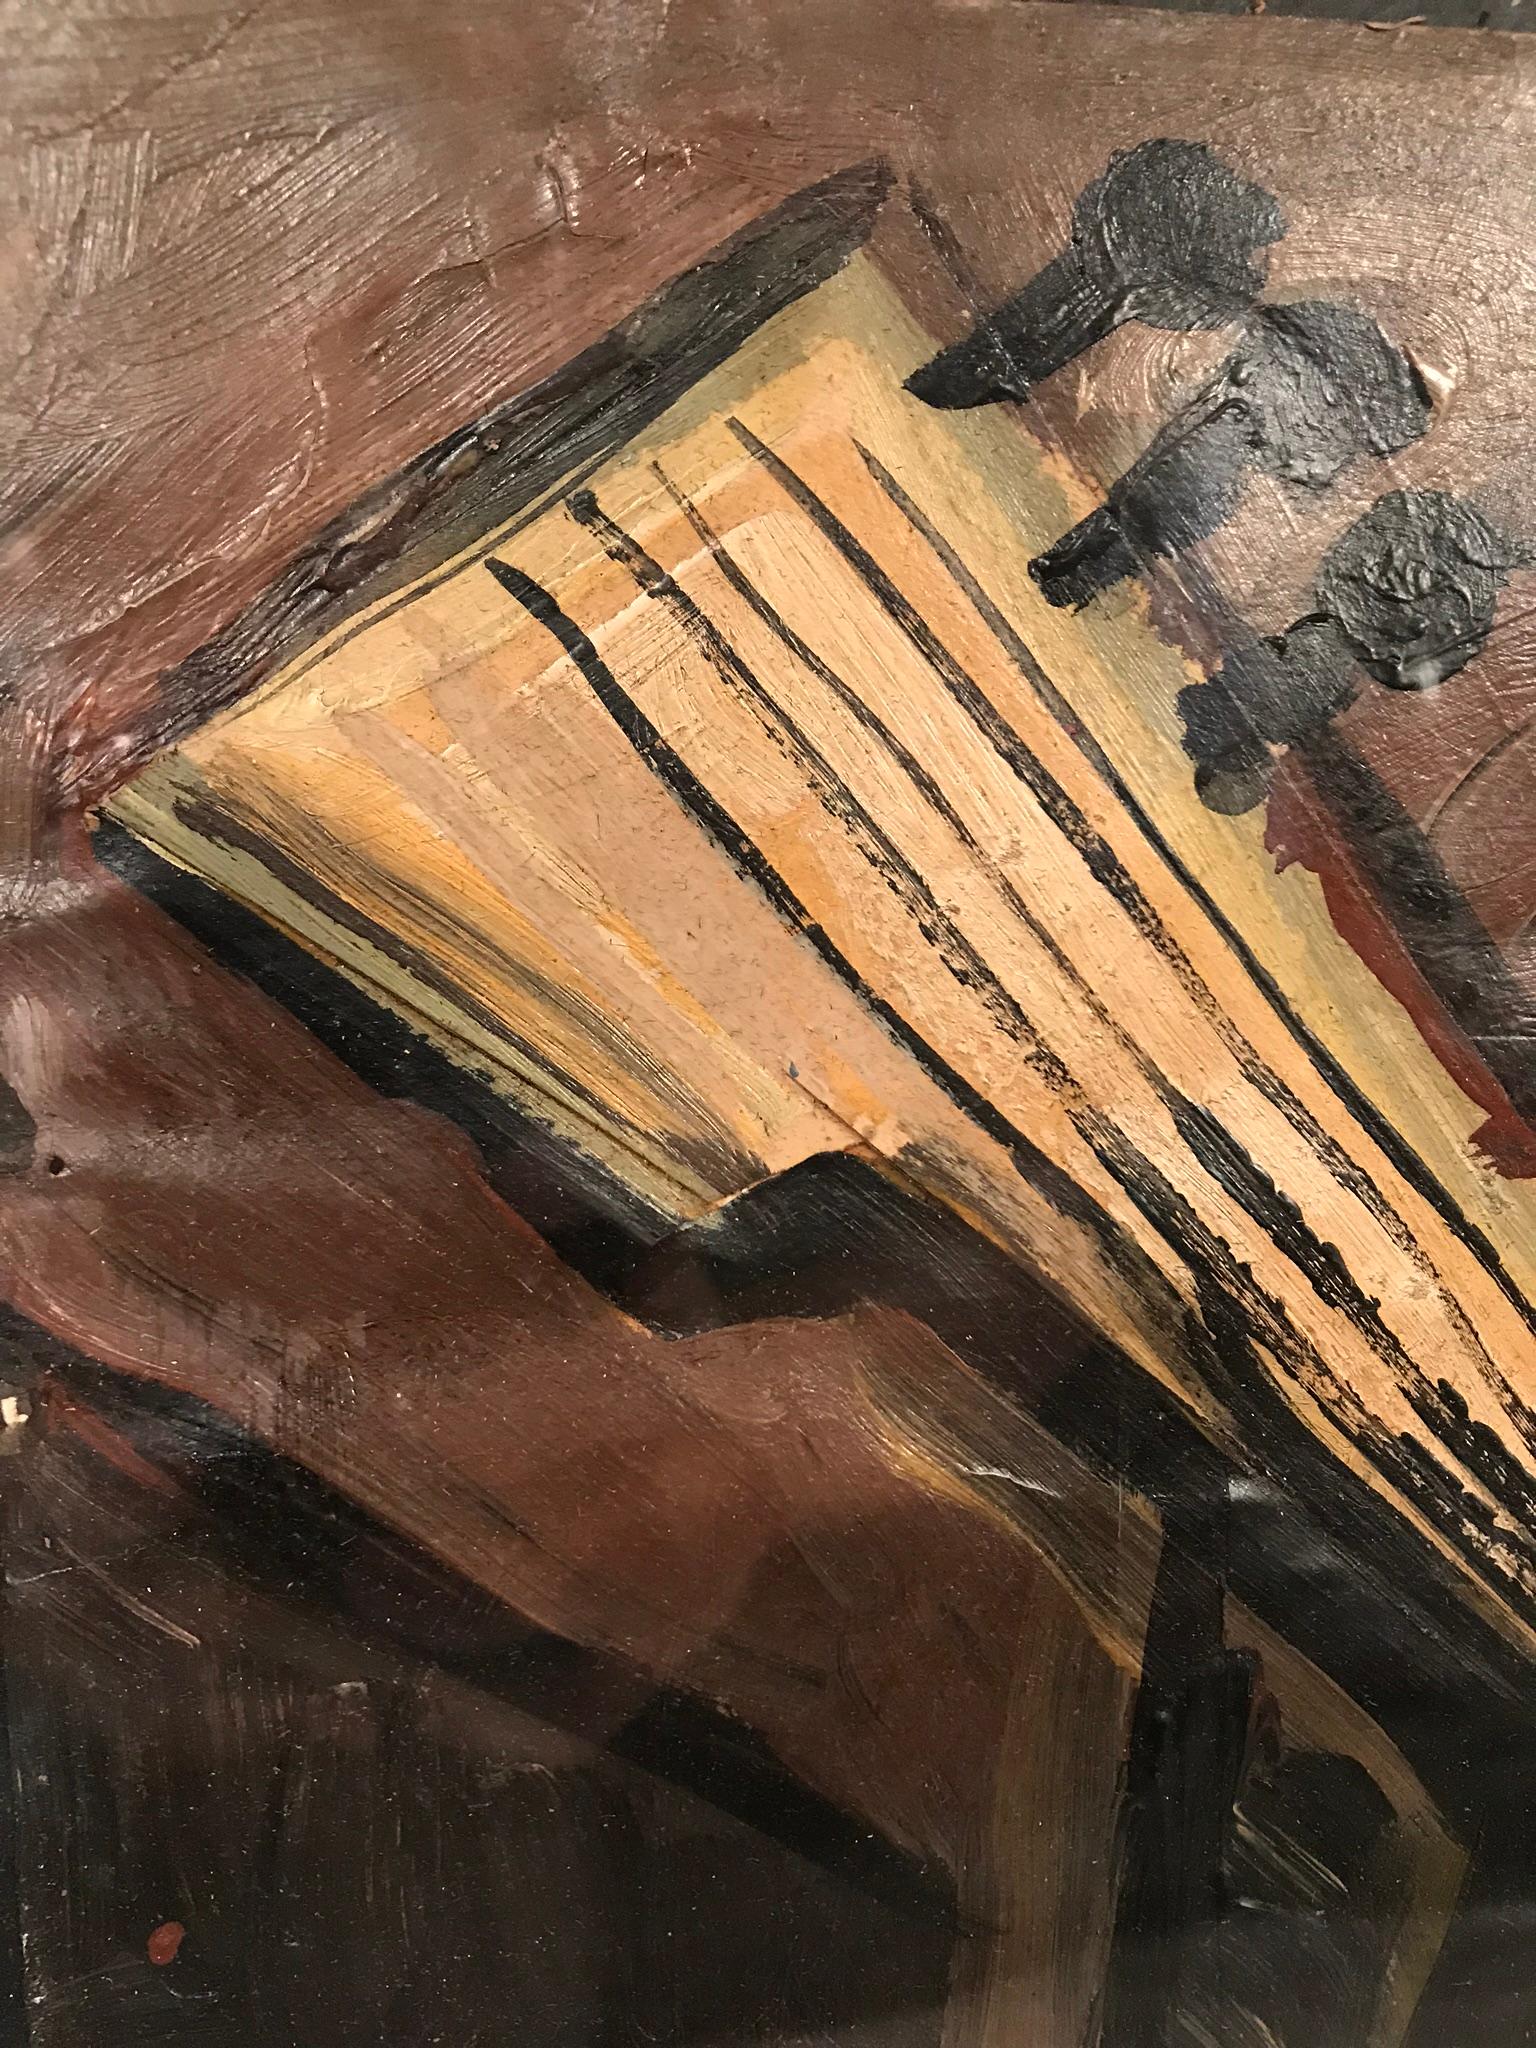 This painting of a guitar provides a simplistic interest to the viewer with it's different lines, shapes and brush strokes. It's signed J. Lacoste.